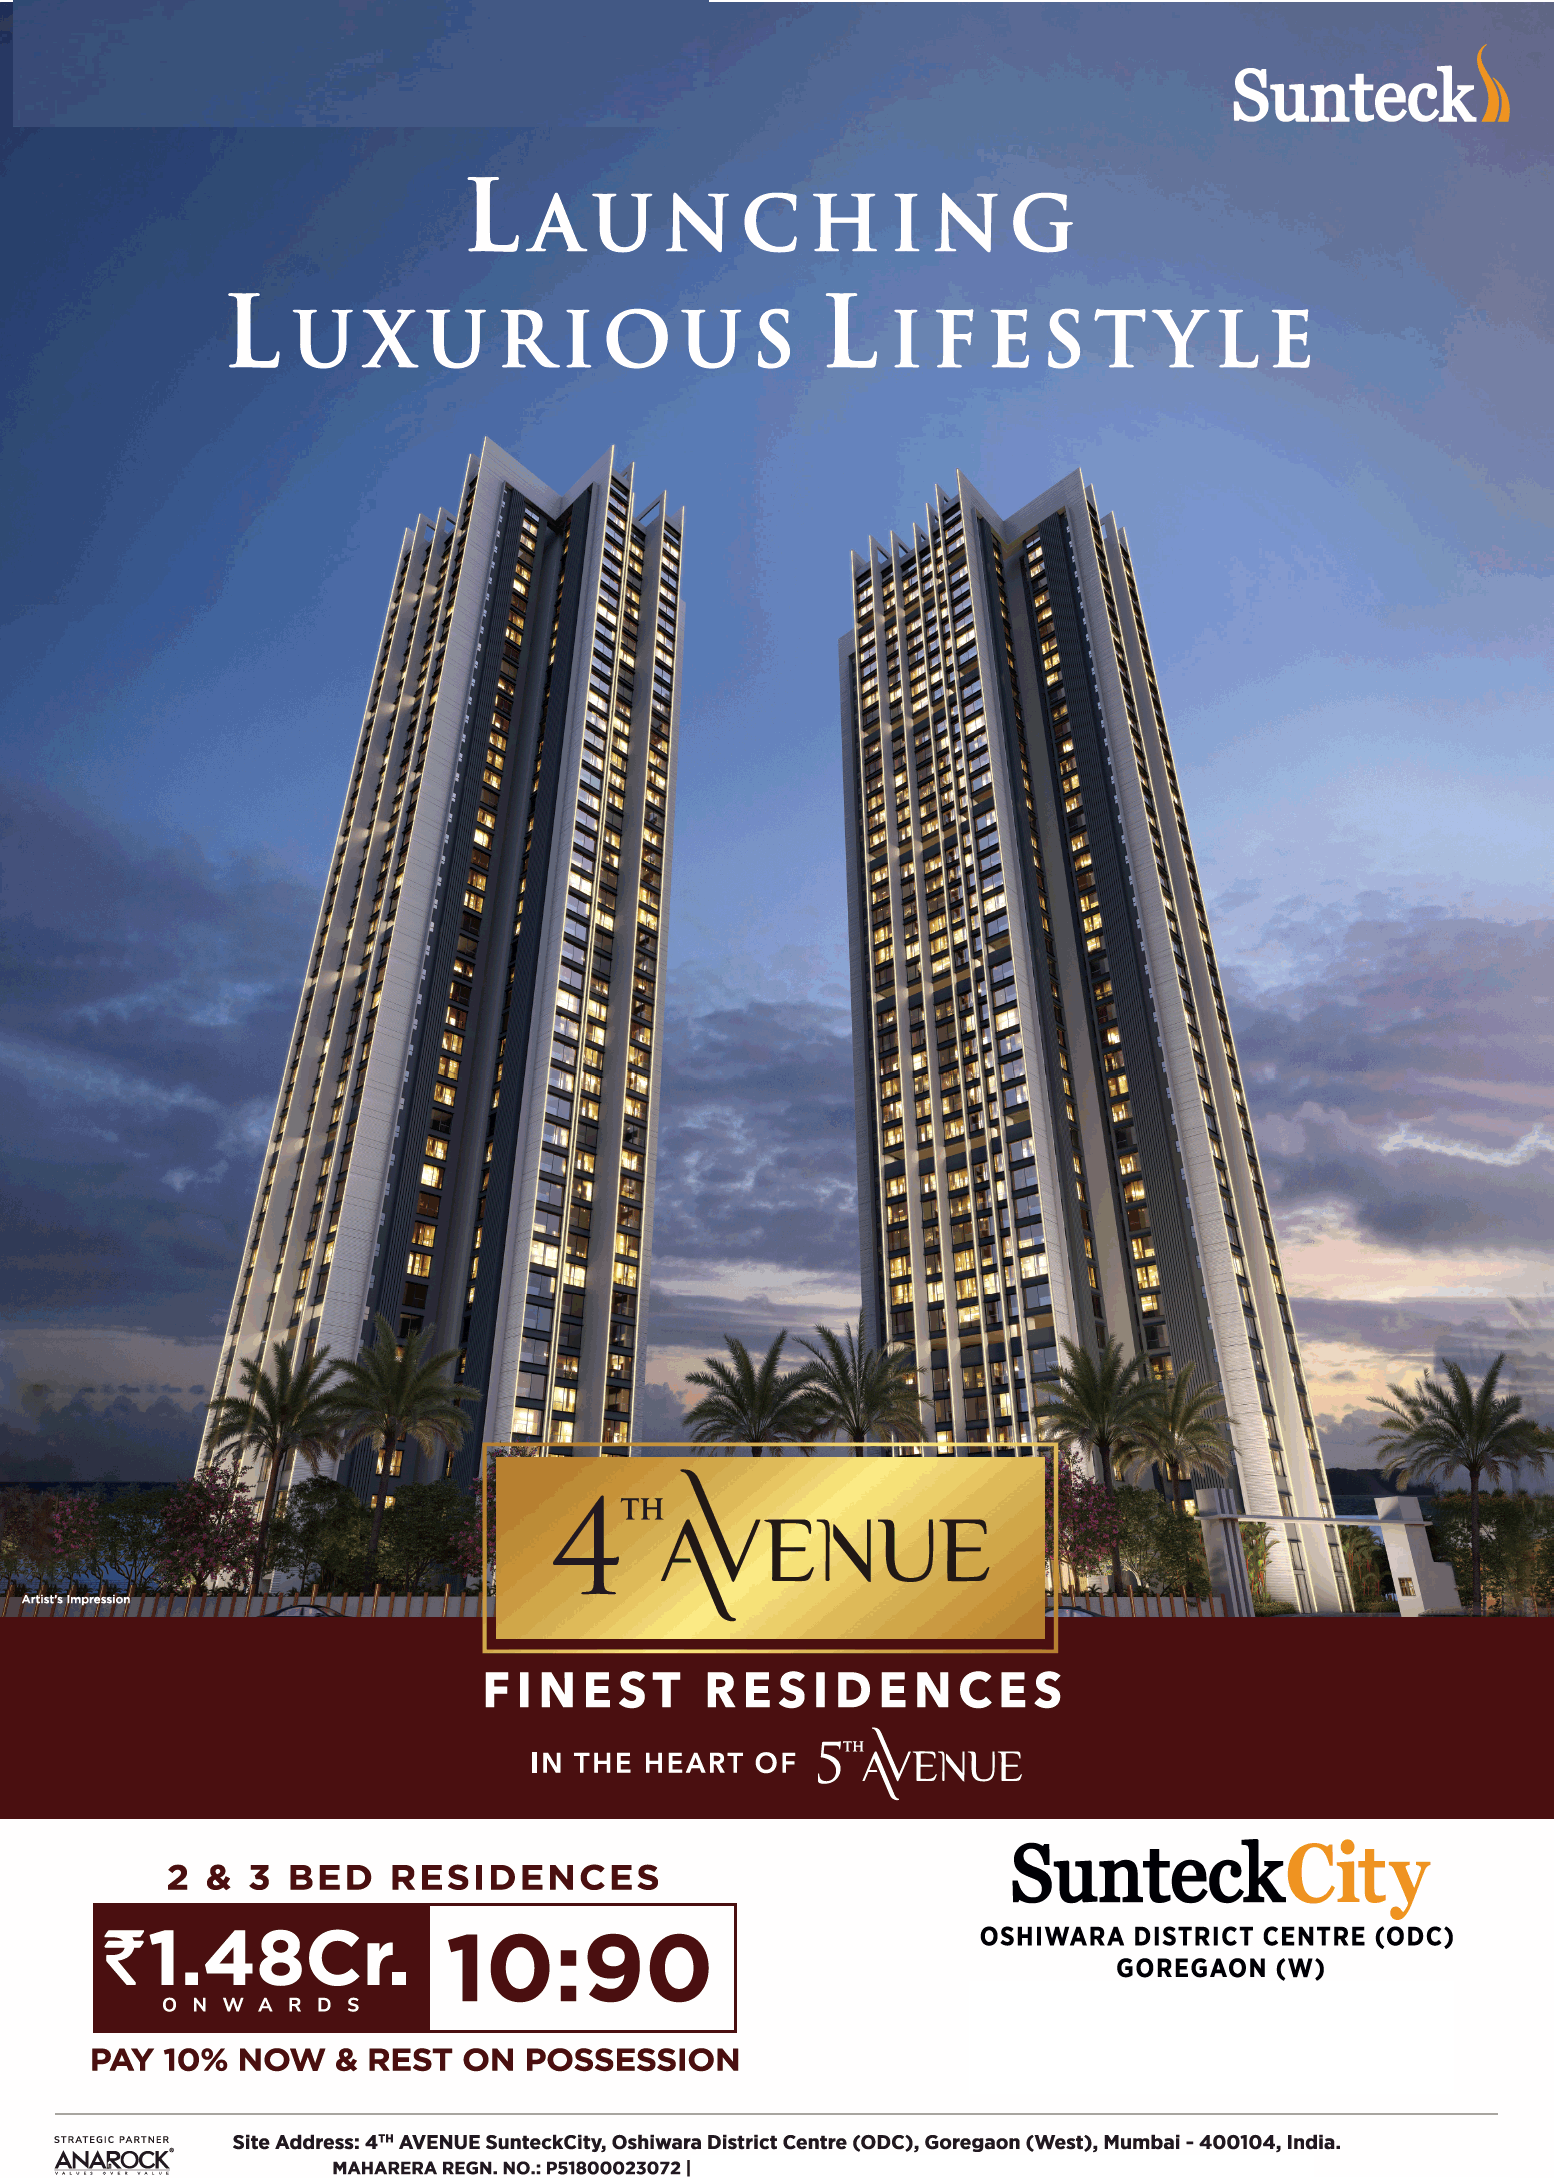 2 and 3-bed residences starting from Rs 1.48 Cr onwards at Sunteck City in Mumbai Update